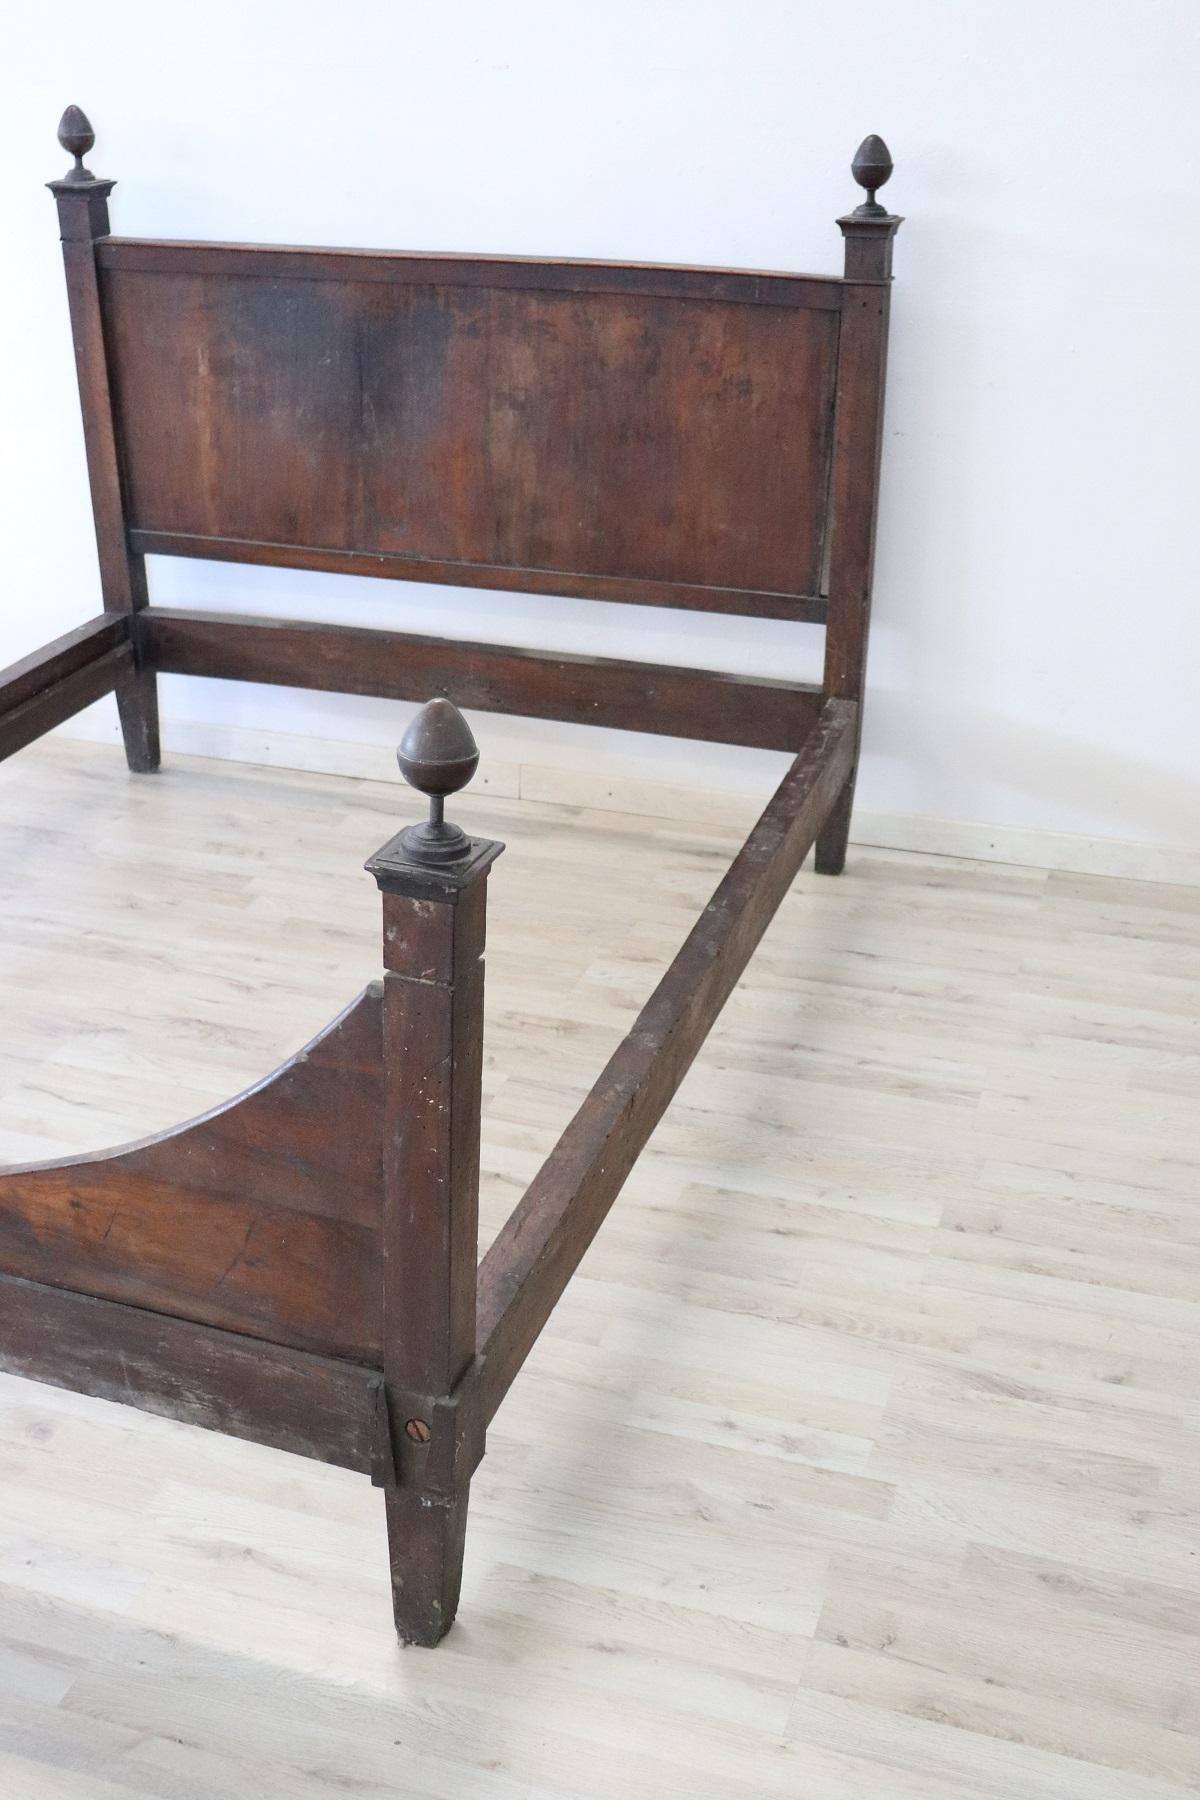 Beautiful Italian Louis XVI carved walnut bed. The bed is very linear with delicate classic style. antique walnut has reached a great patina Internal measures cm 192 x 141 inch 75,5906 x 55,5118.
The antique bed have been used in need of